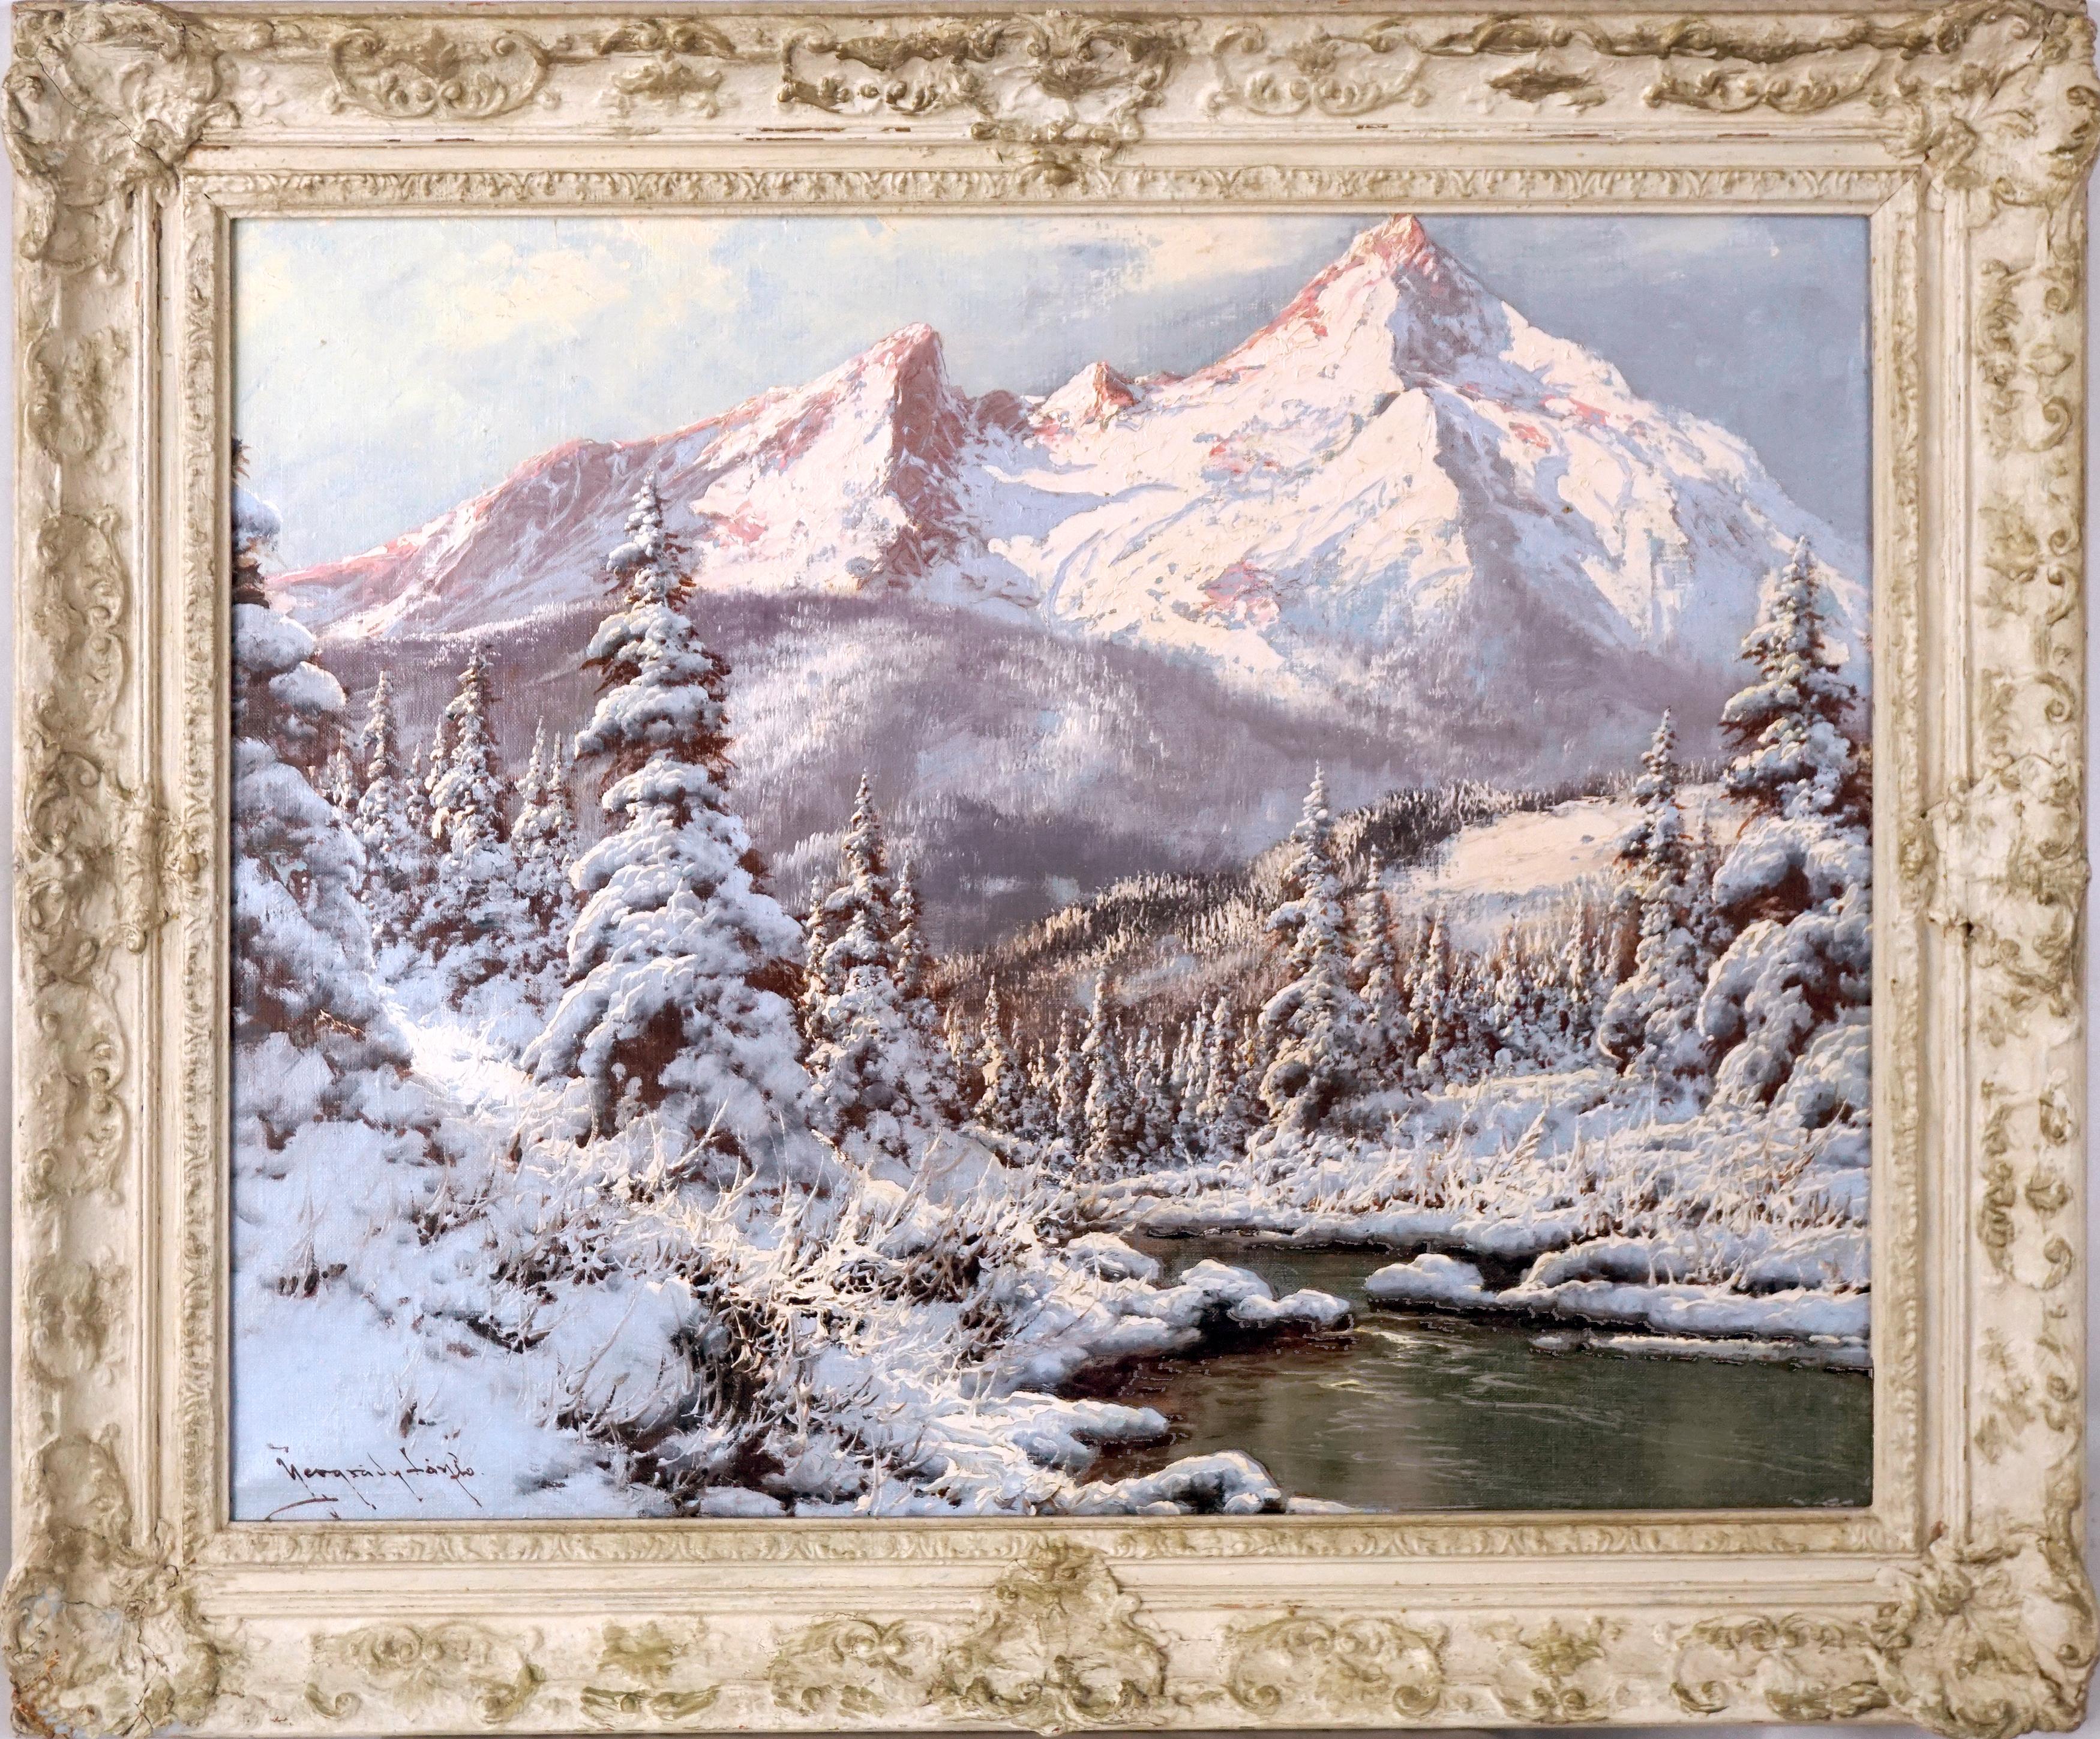 Laszlo Neogrady Landscape Painting - Winter's Snowy Tatra Mountains with Pines and Stream